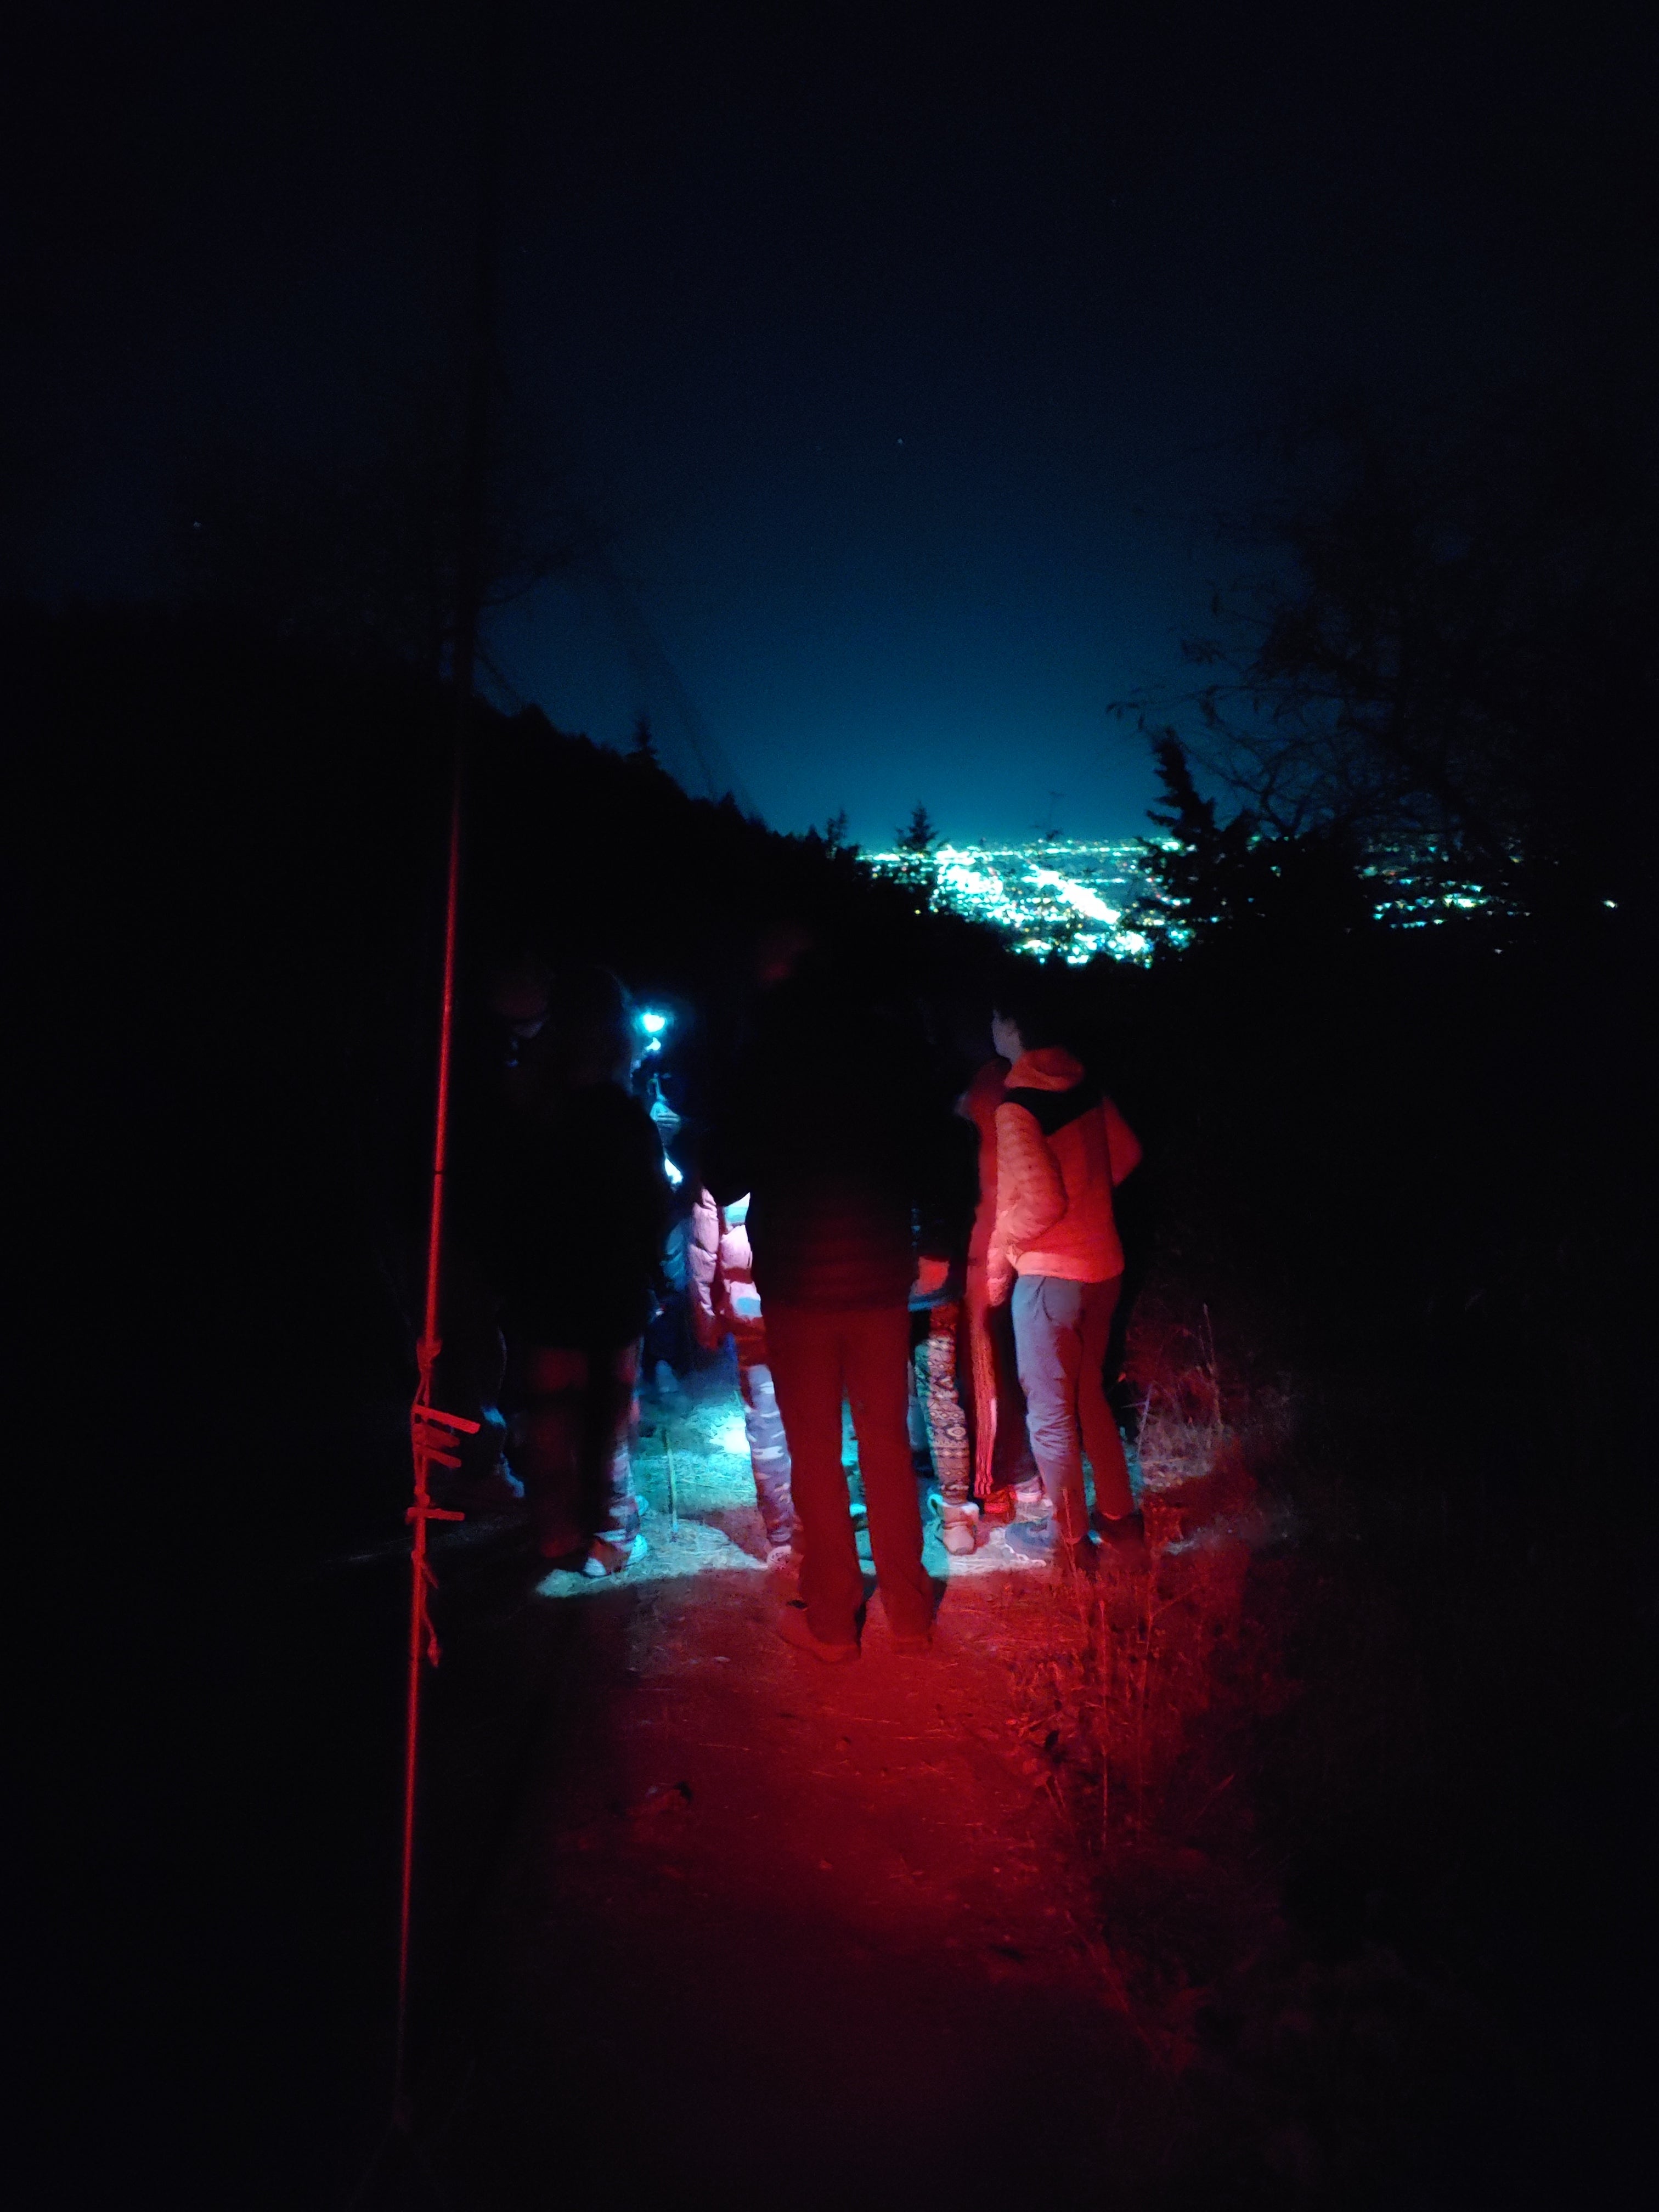 people in jackets near a net at night with biologists in headlamps outside. the city lights of boise glow behind them